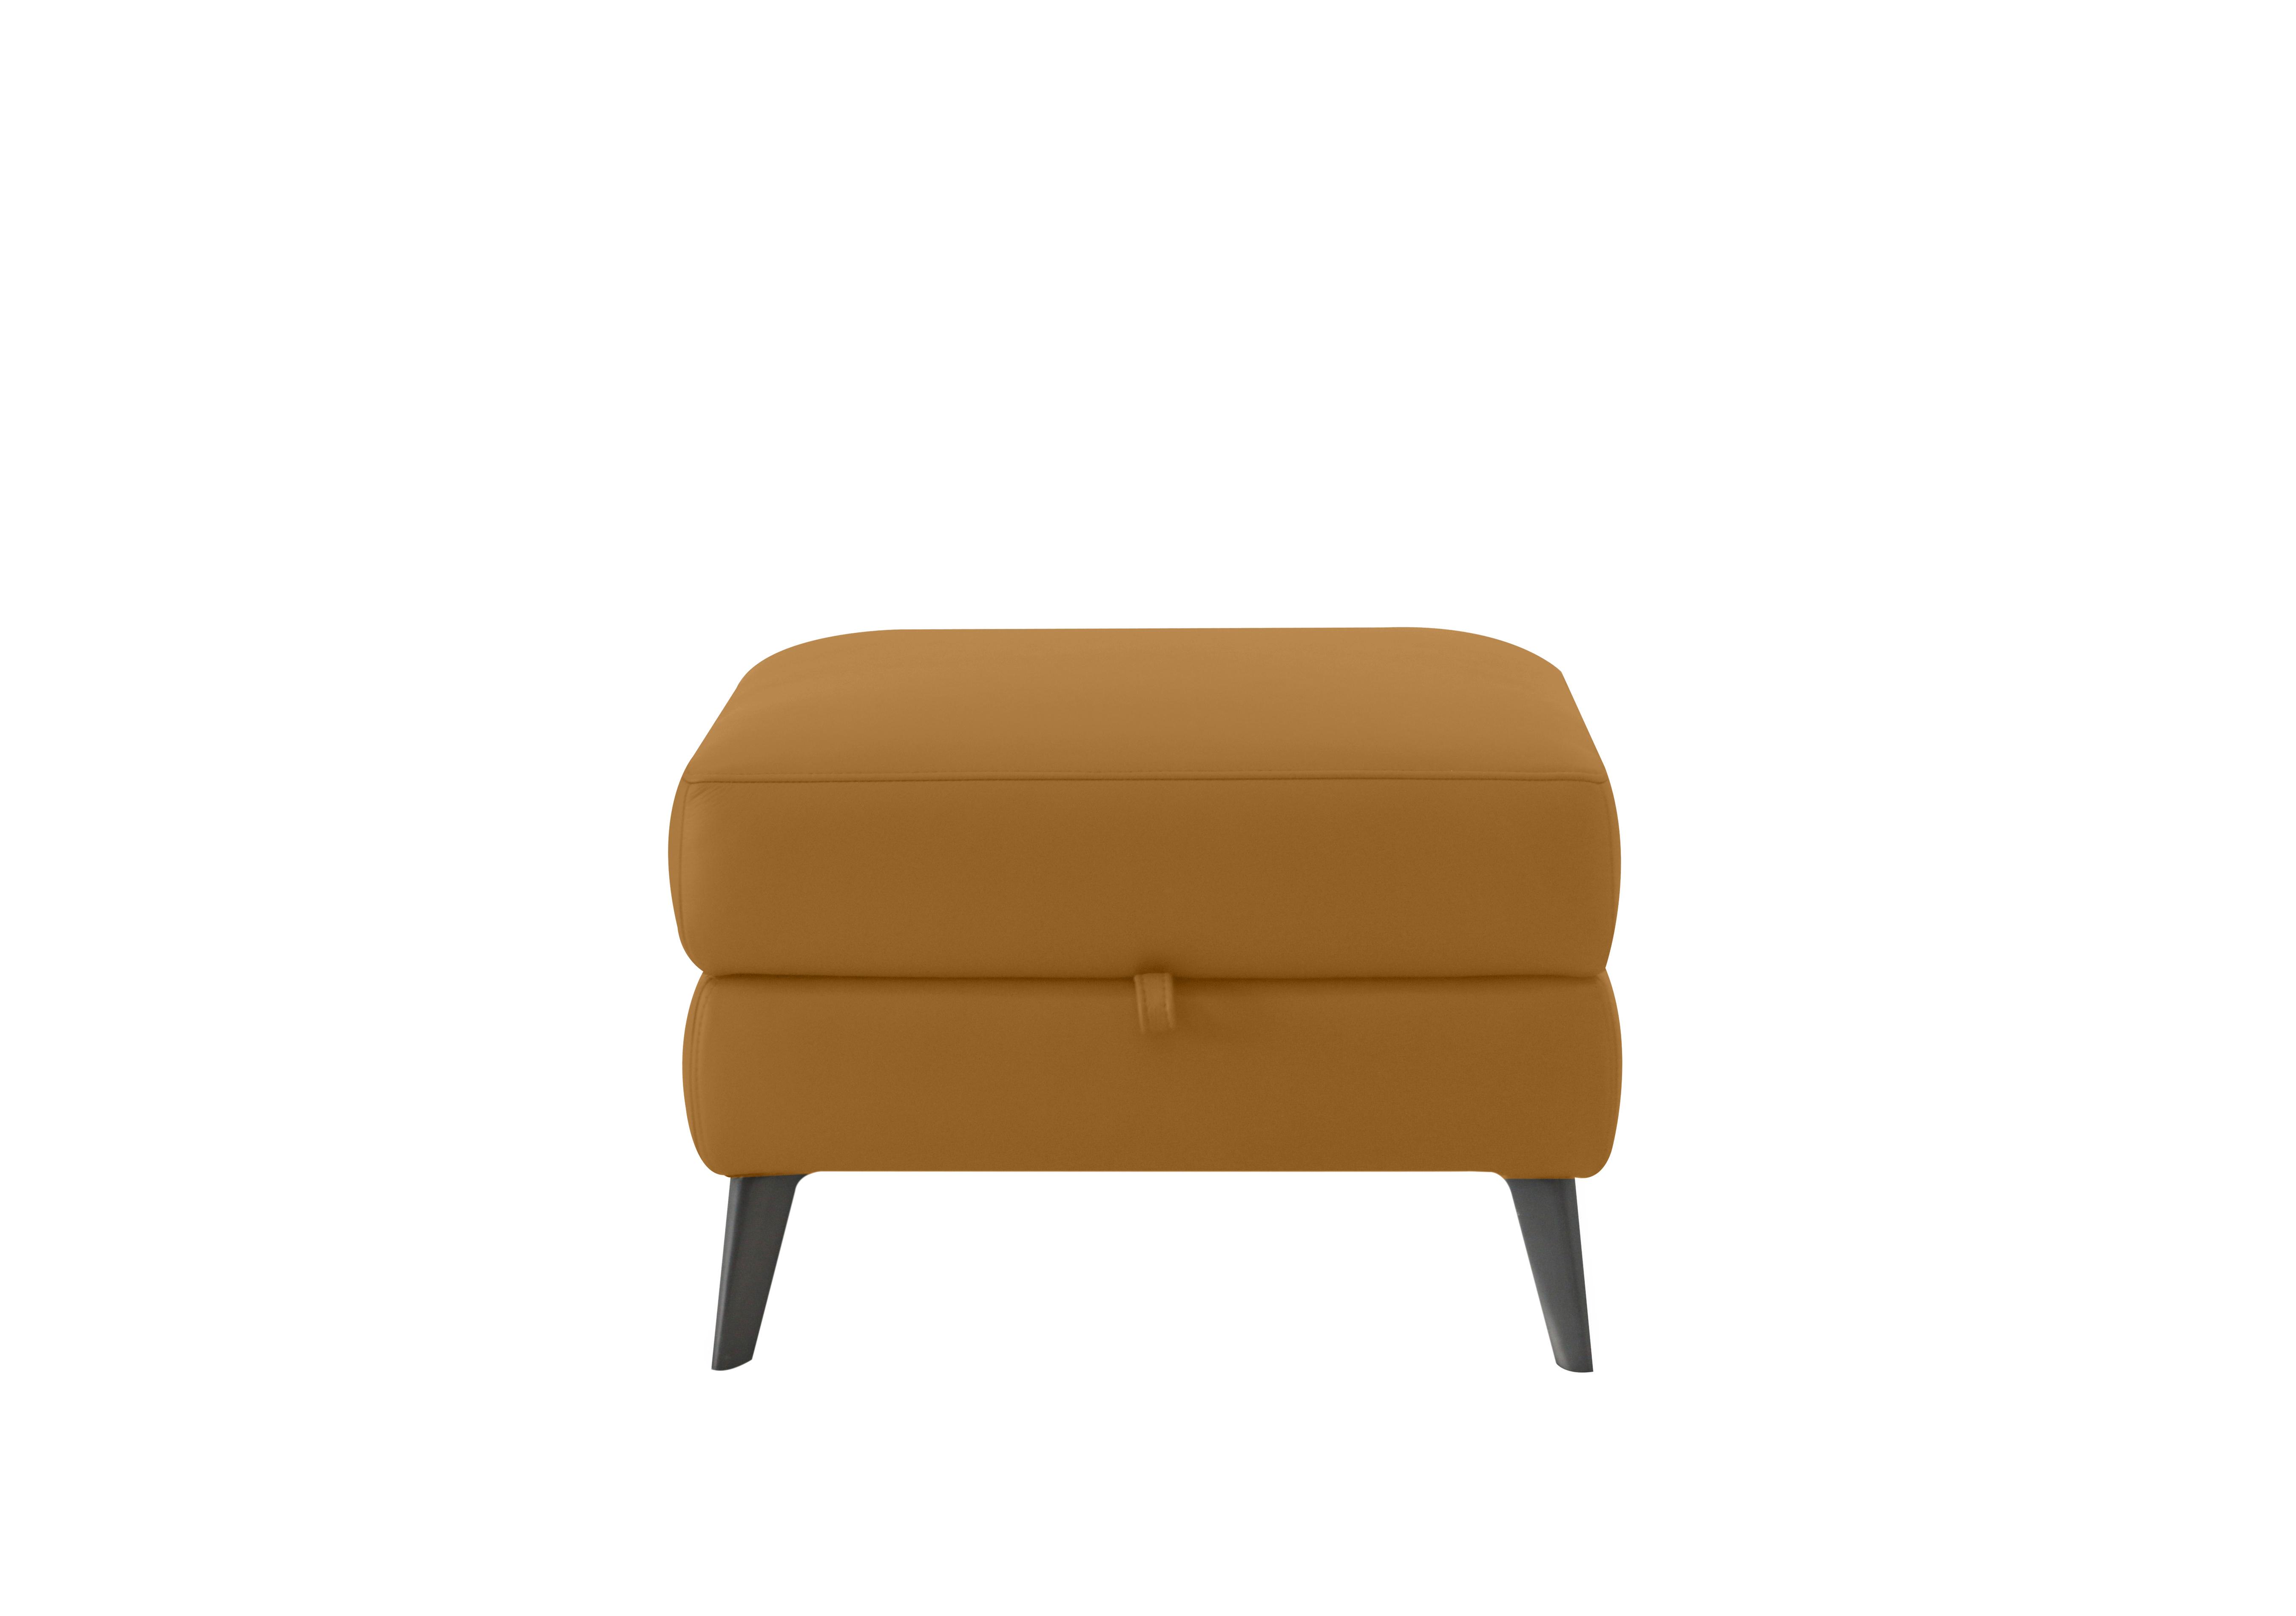 Logan Leather Storage Footstool in Np-606e Honey Yellow on Furniture Village